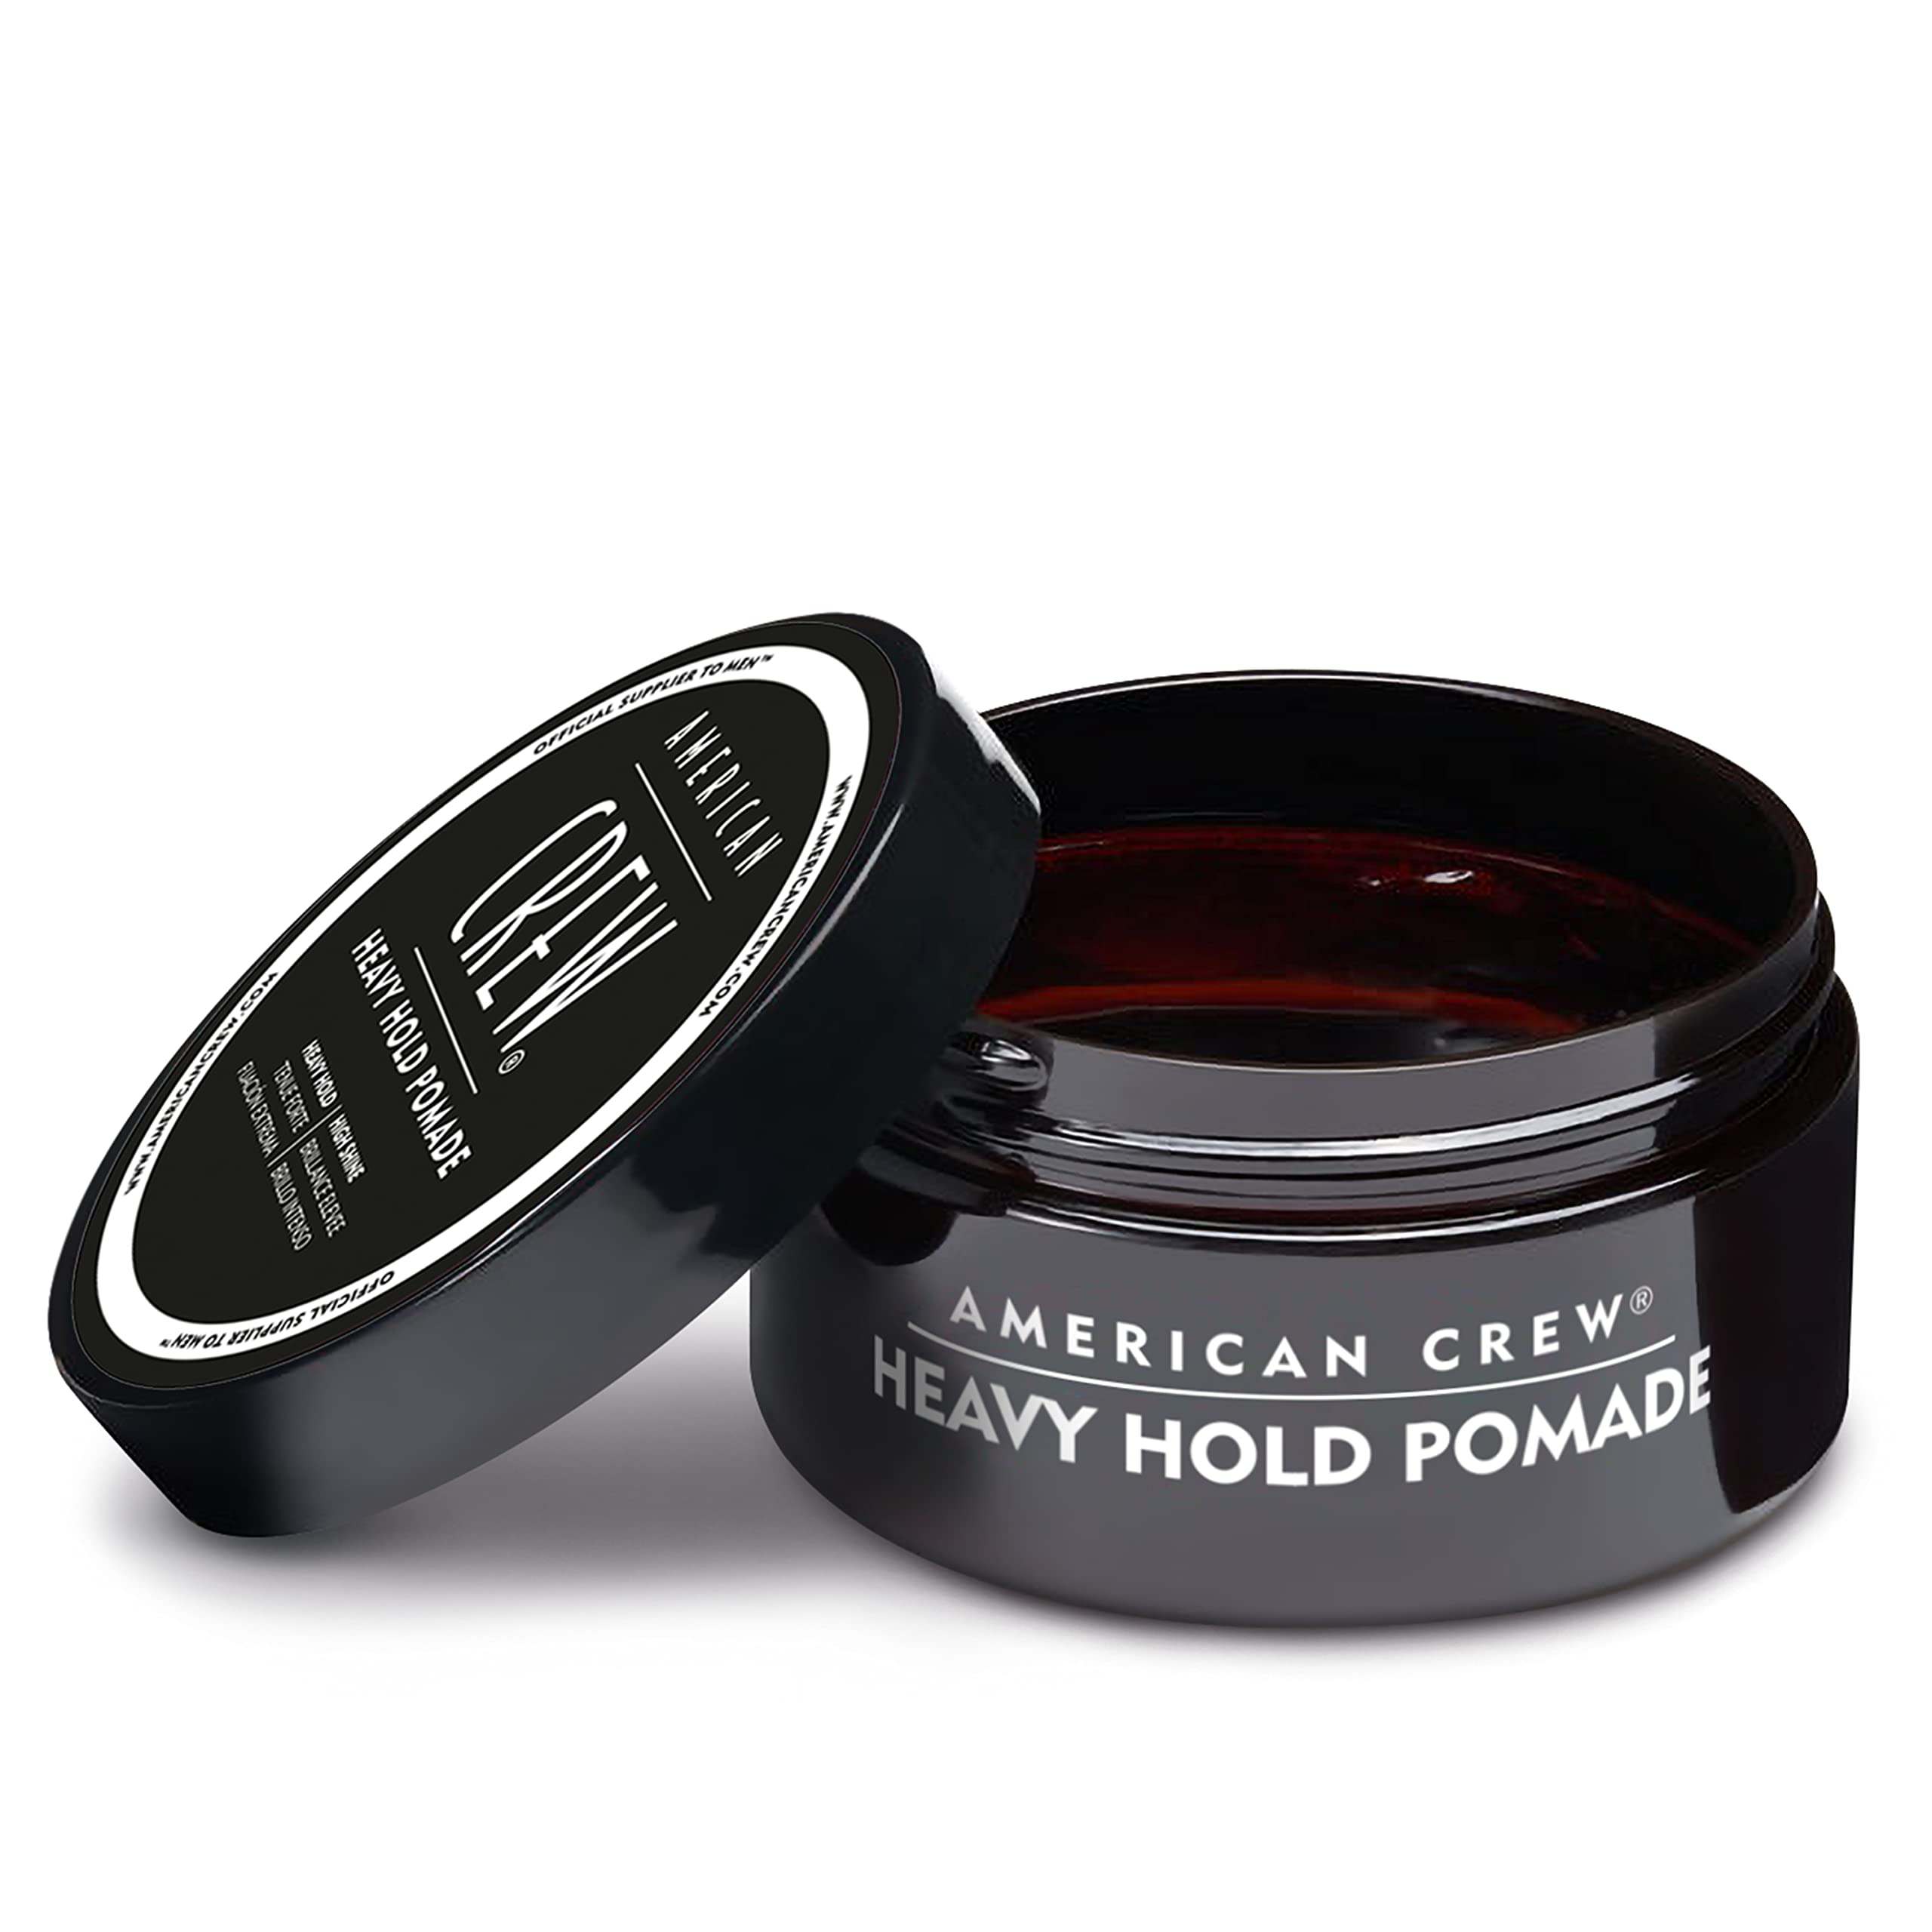 Men's Hair Pomade by American Crew (OLD VERSION), Like Hair Gel with Heavy Hold with High Shine, 3 Oz (Pack of 1)